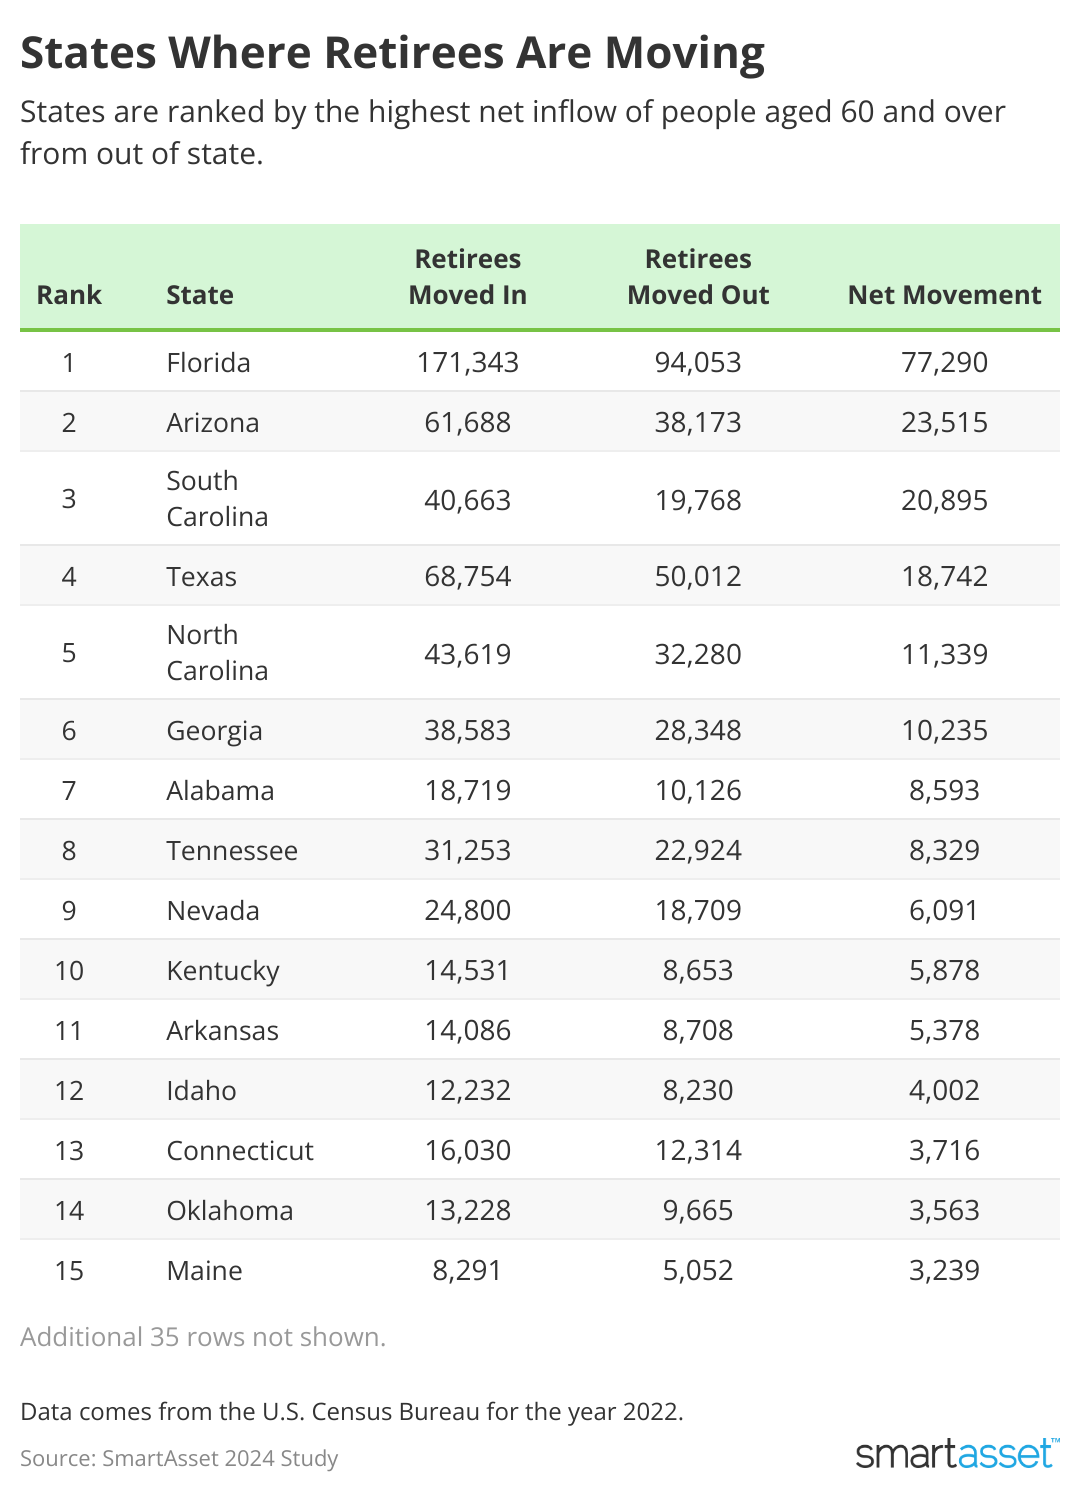 Table showing Top 20 states where retirees are moving.